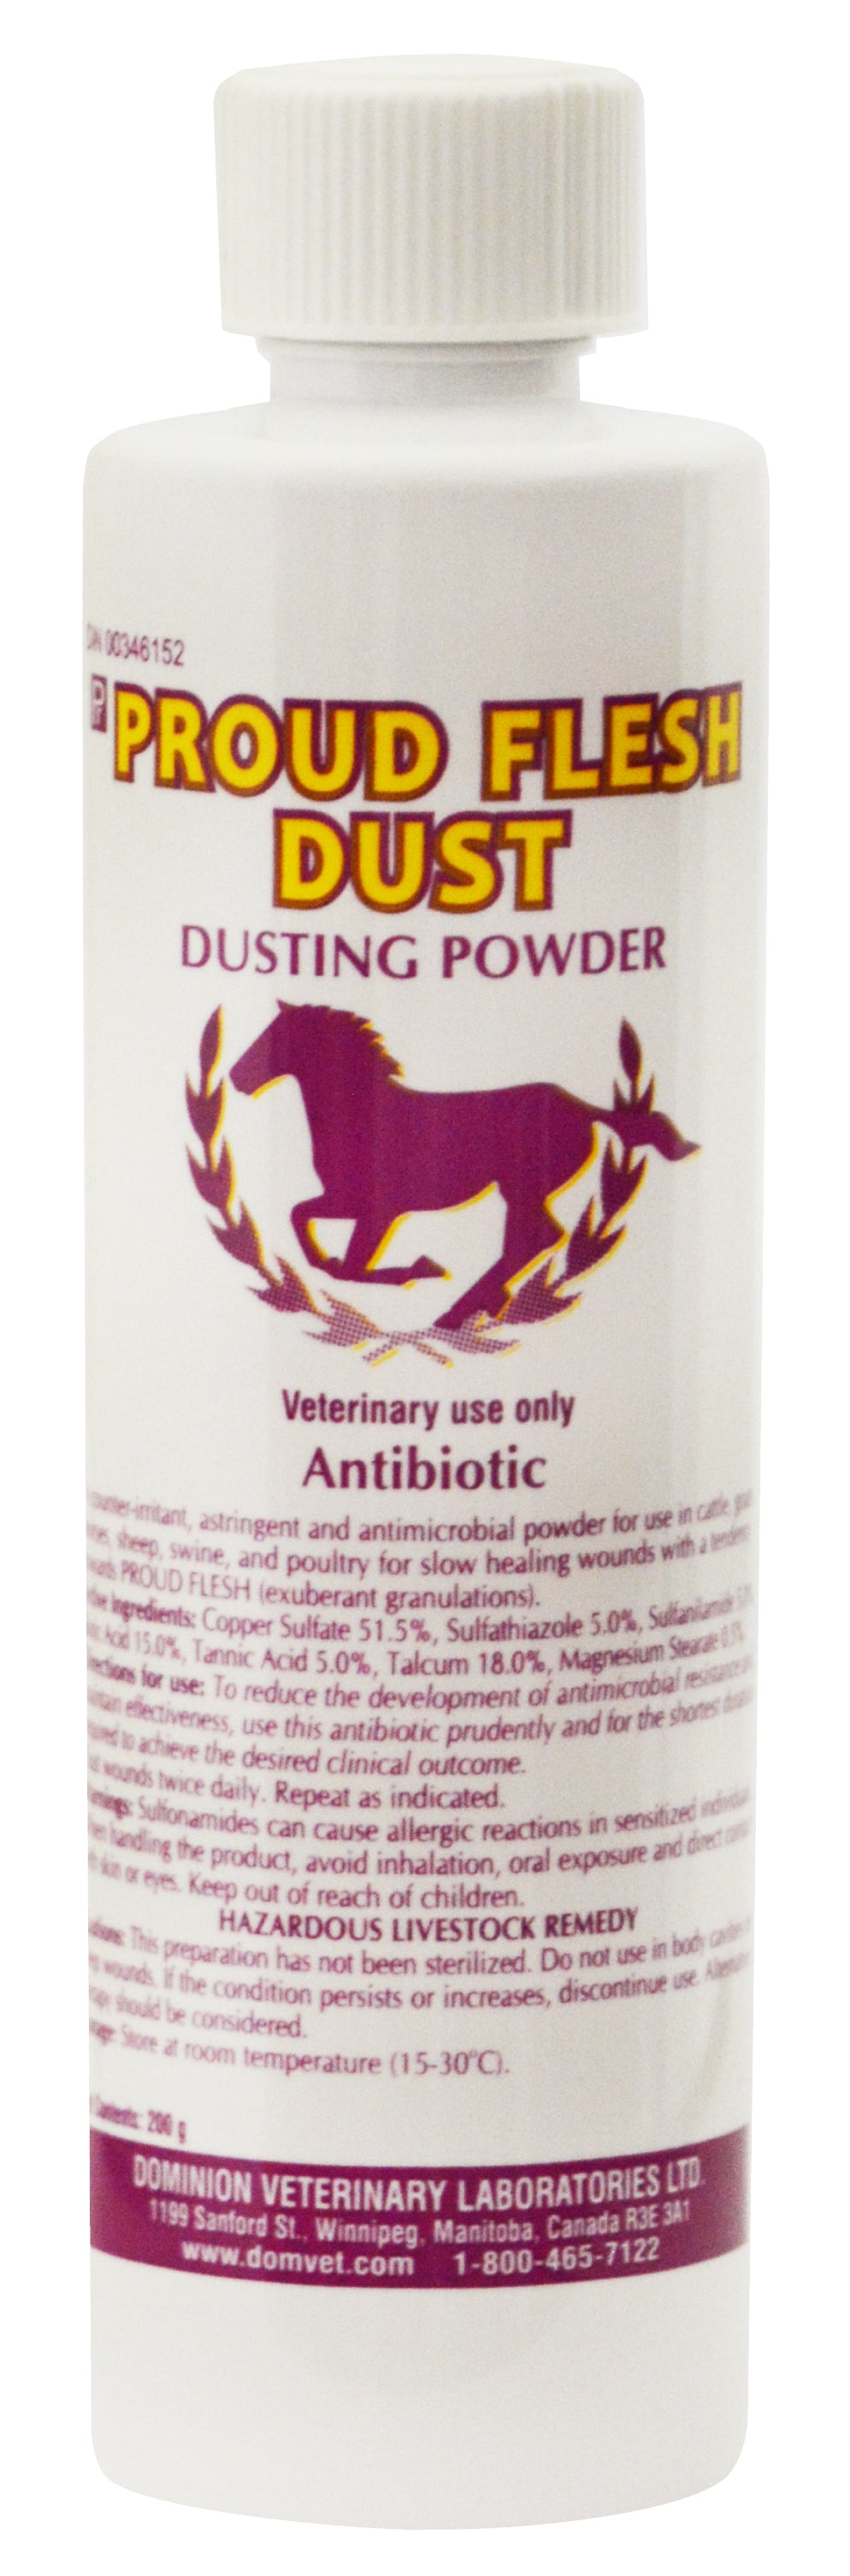 PROUD FLESH DUST 200 G Astringent and antiseptic powder that fights irritation